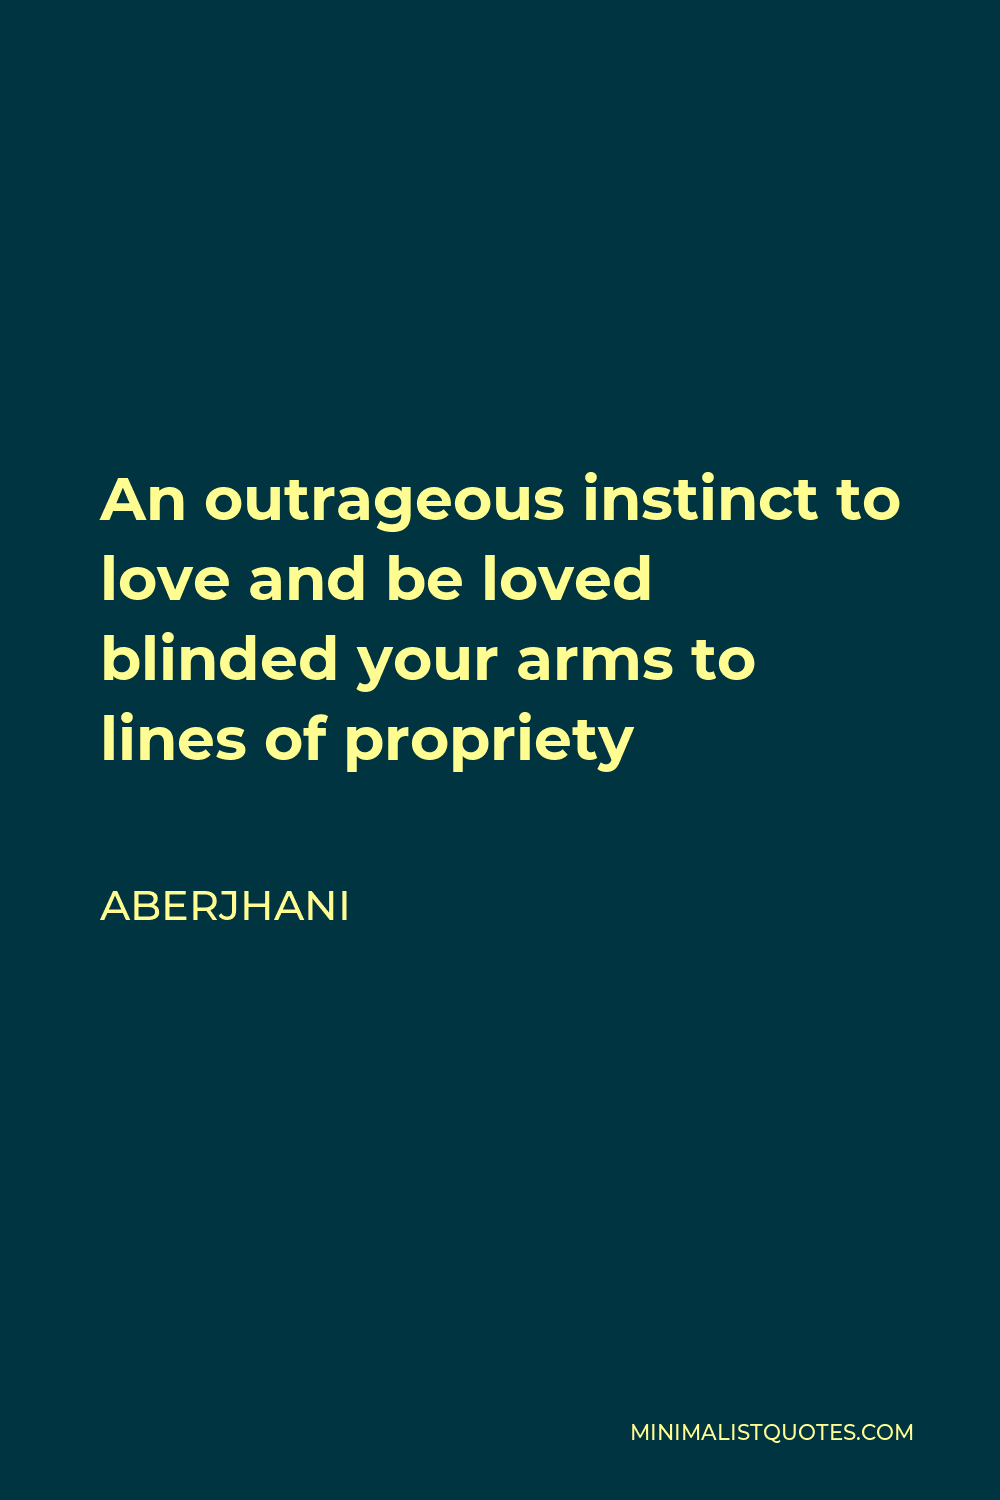 Aberjhani Quote - An outrageous instinct to love and be loved executed your brain every hour on the hour.